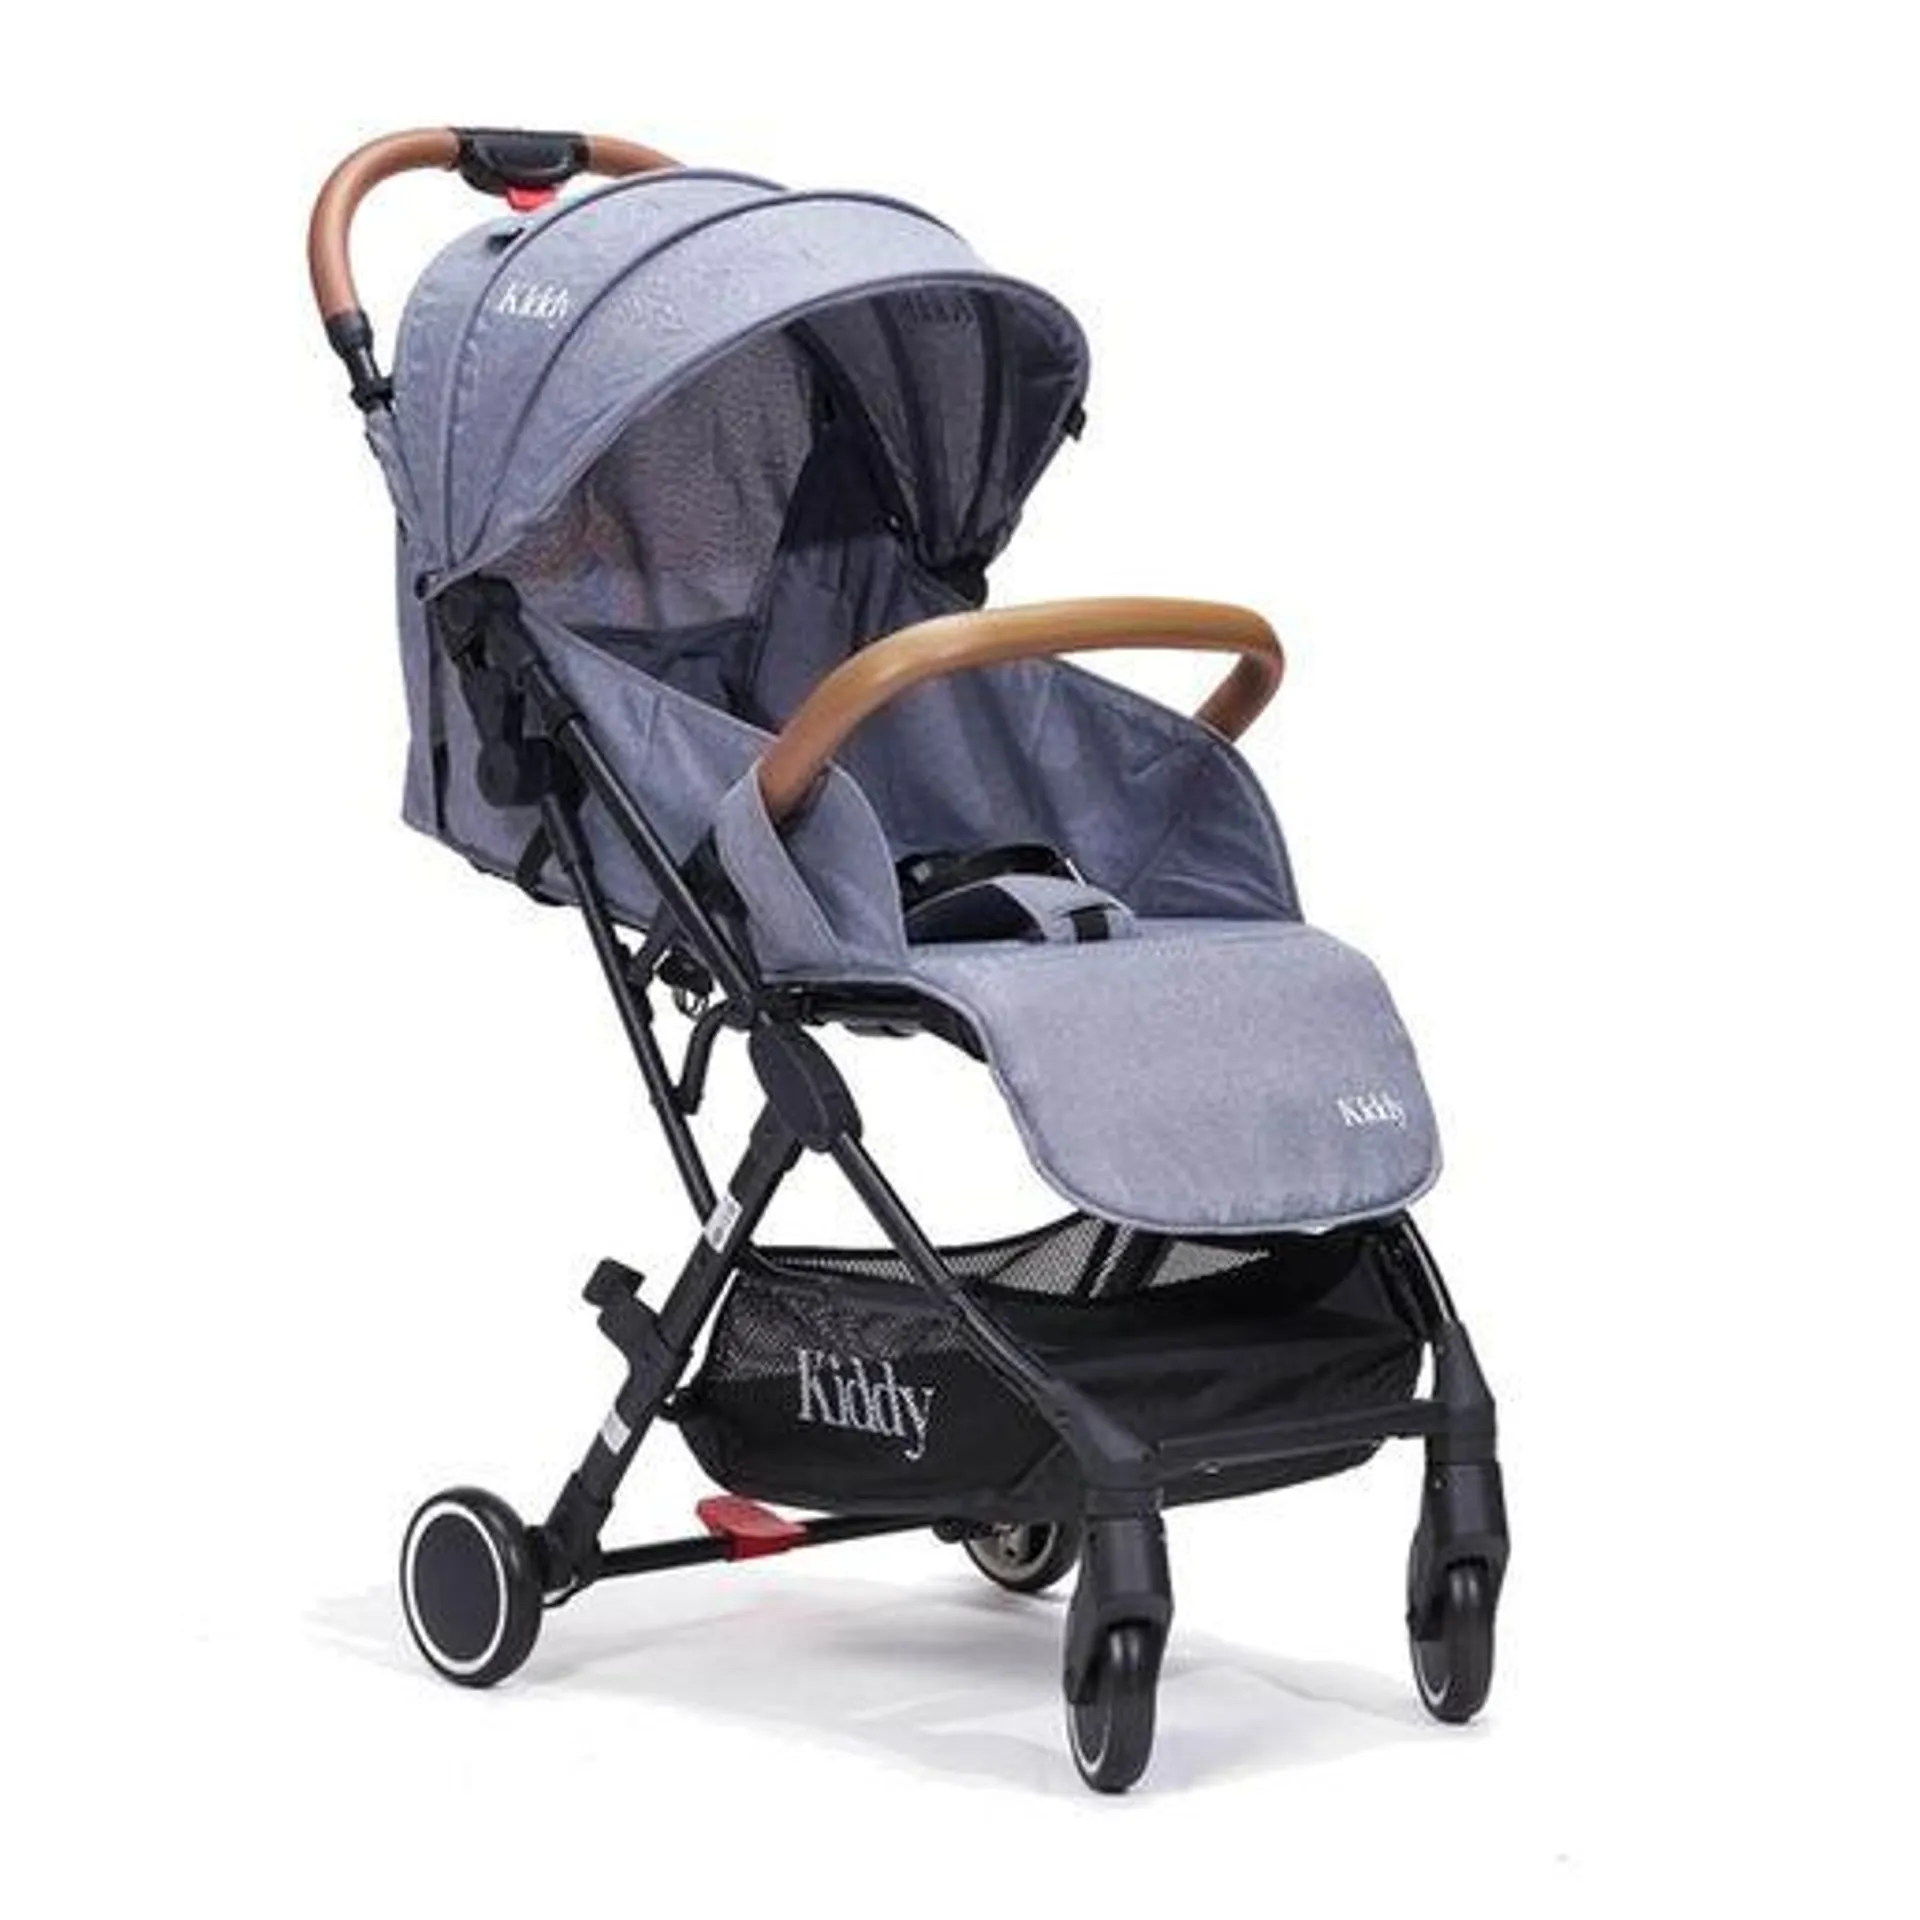 COCHE KIDDY ULTRACOMPACTO SPRINT GRIS